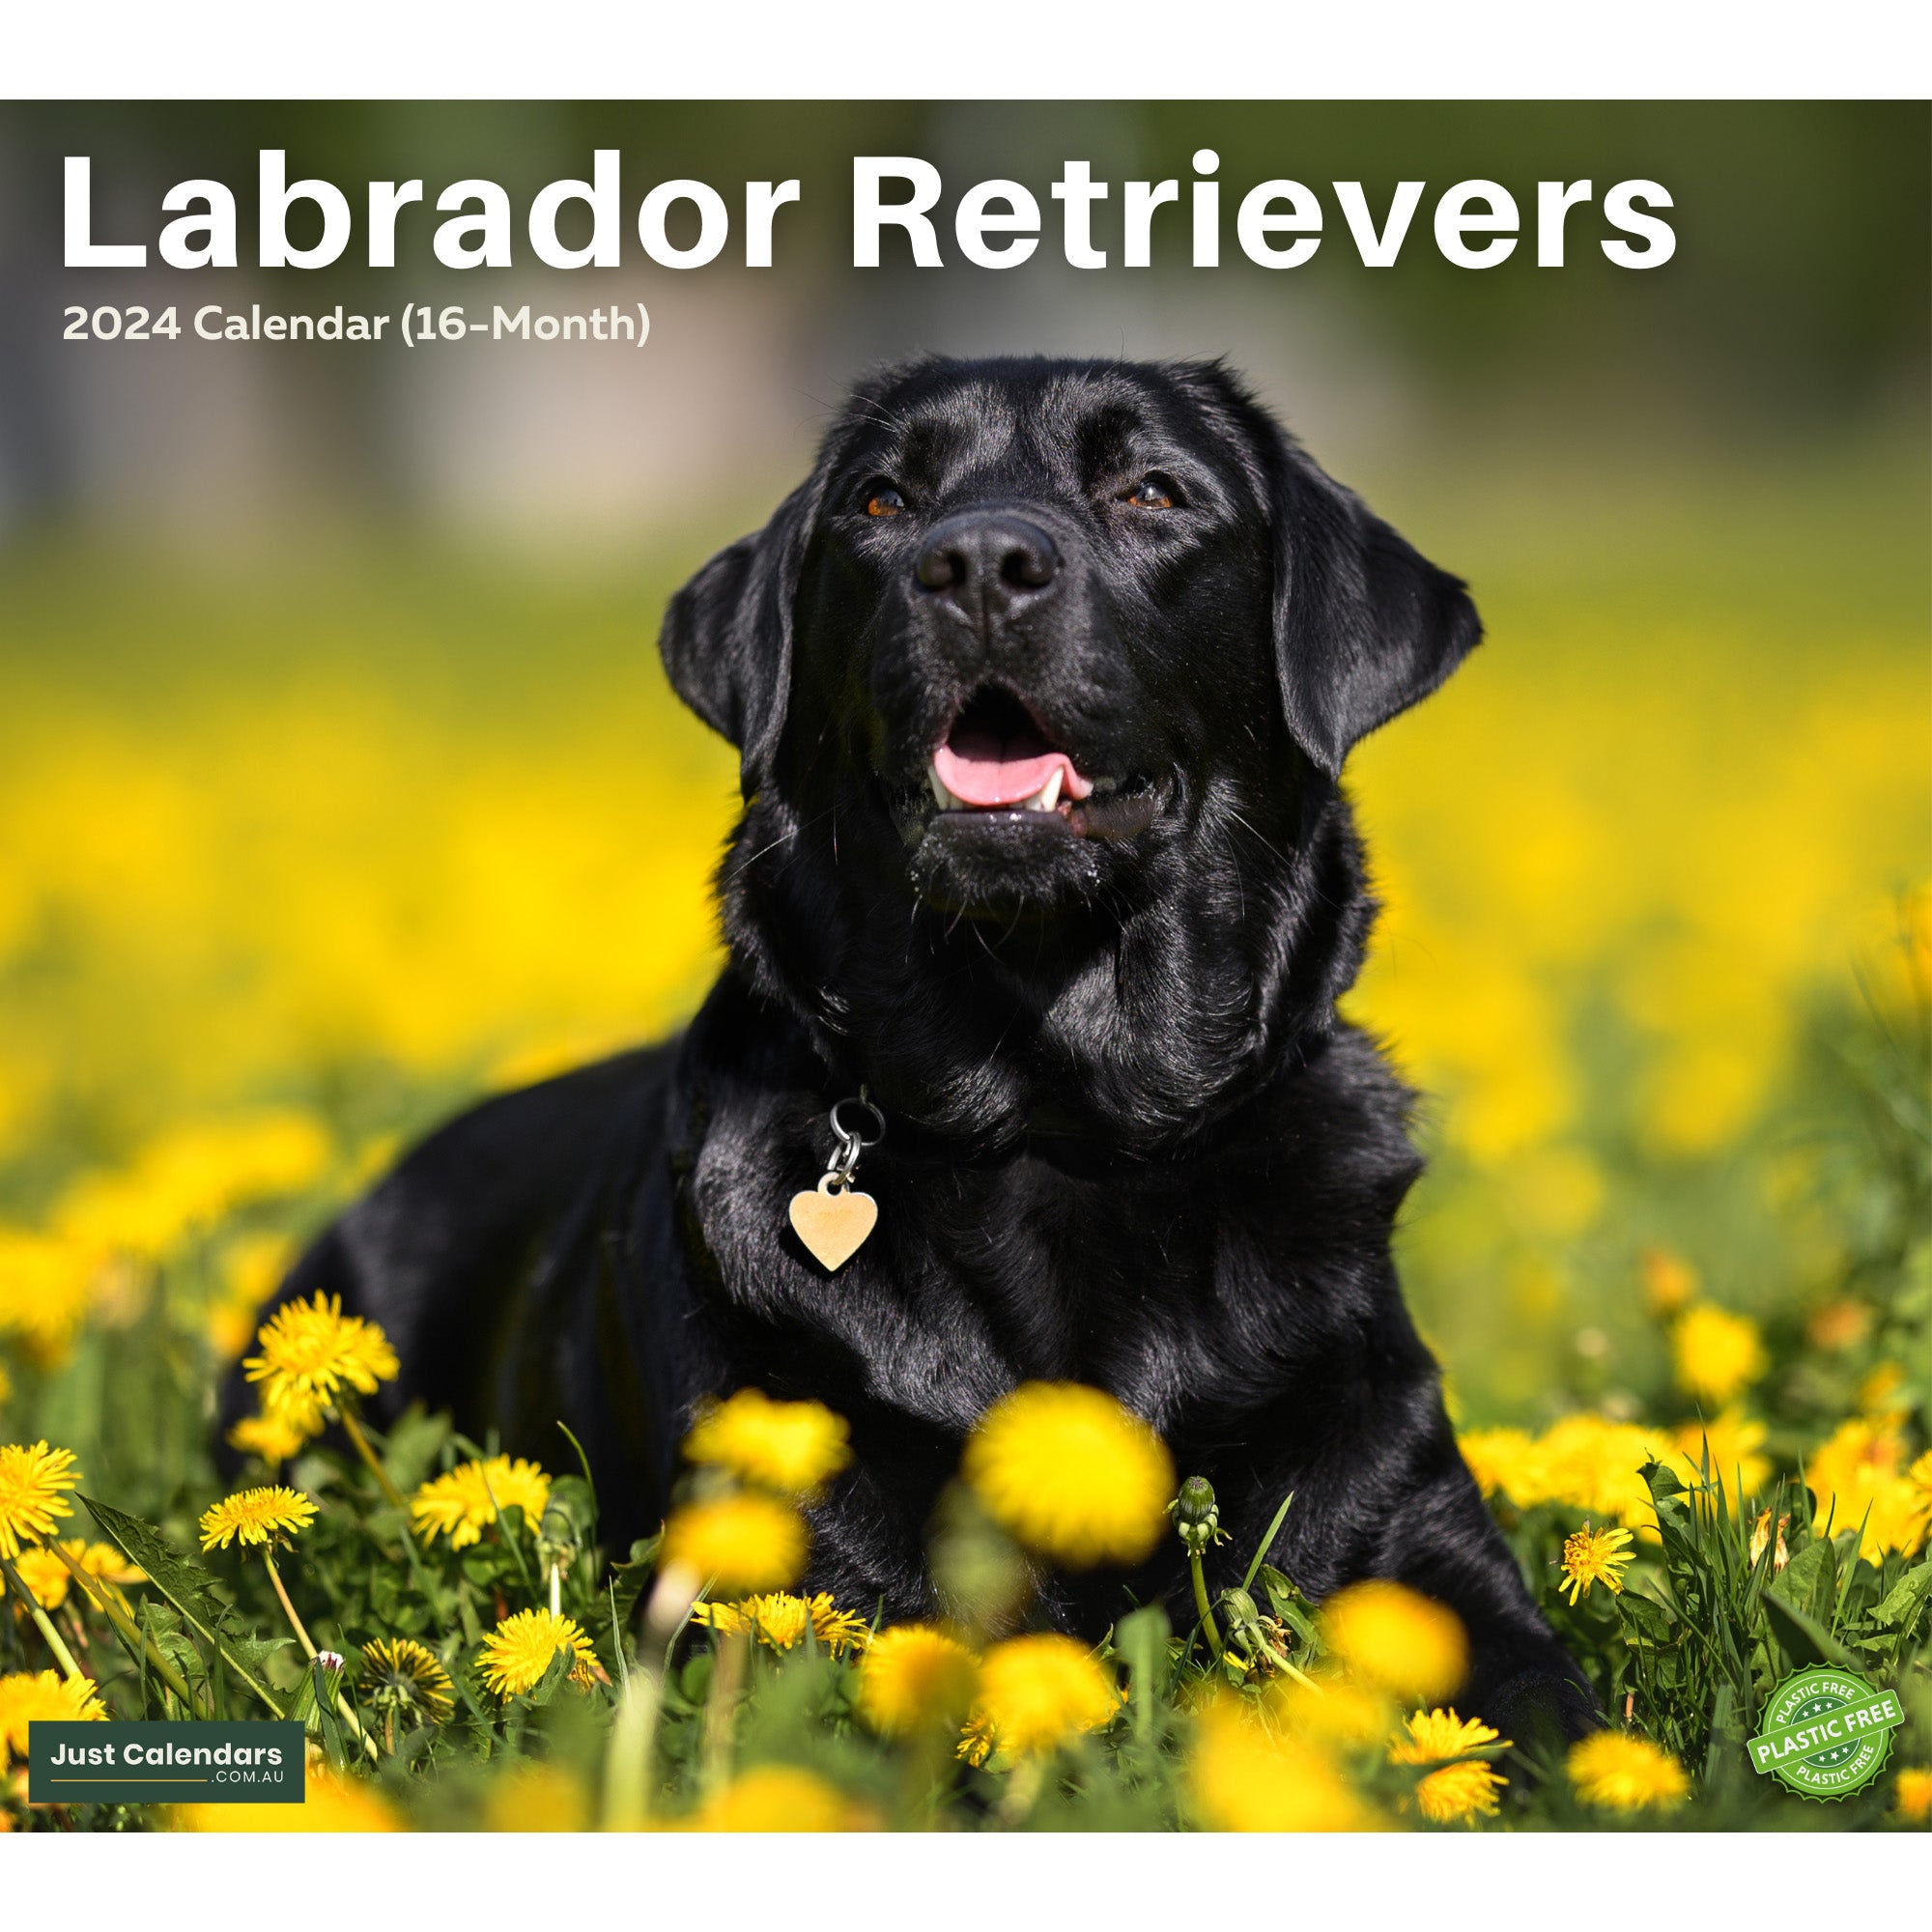 2024 Labrador Retrievers Dogs & Puppies - Deluxe Wall Calendar by Just Calendars - 16 Month - Plastic Free